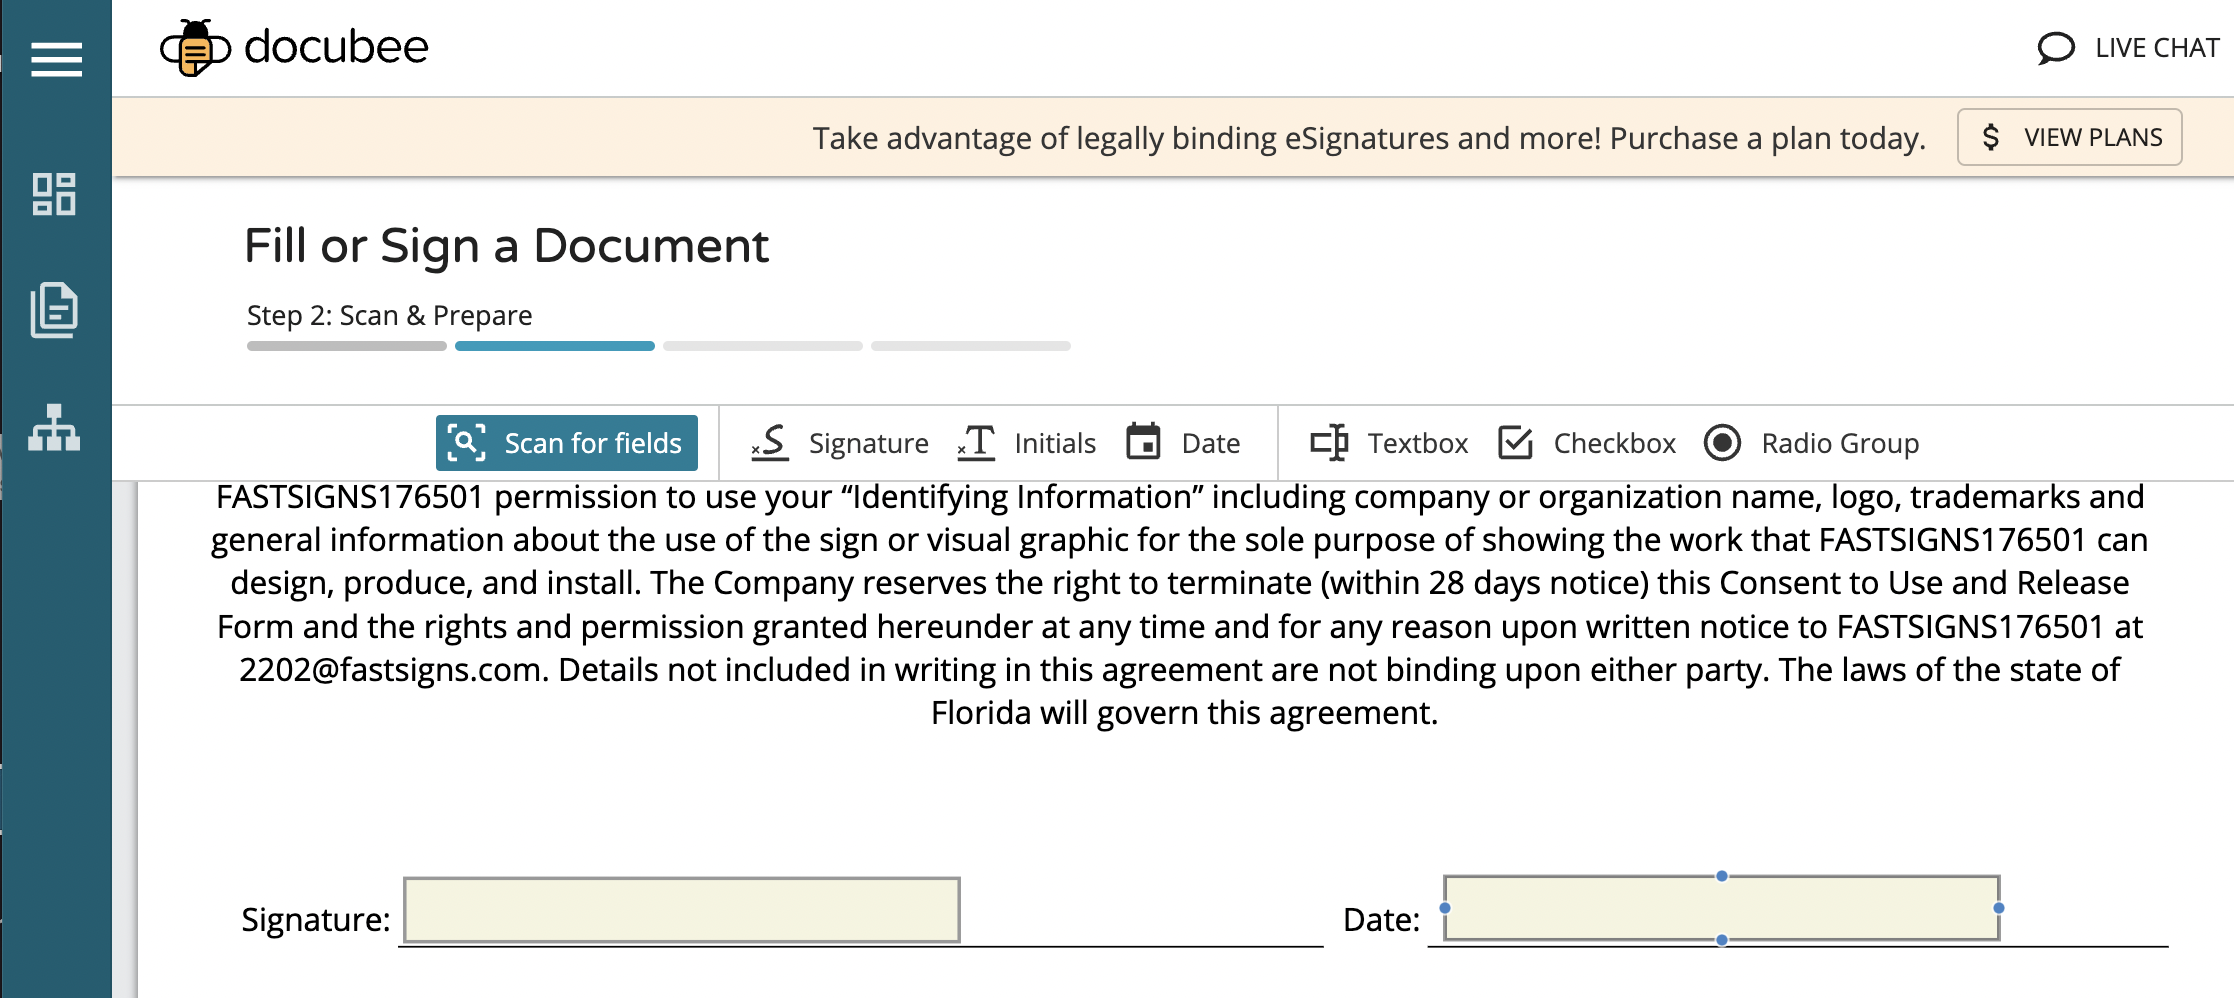 Add fillable signature and date fields to documents for others to complete.